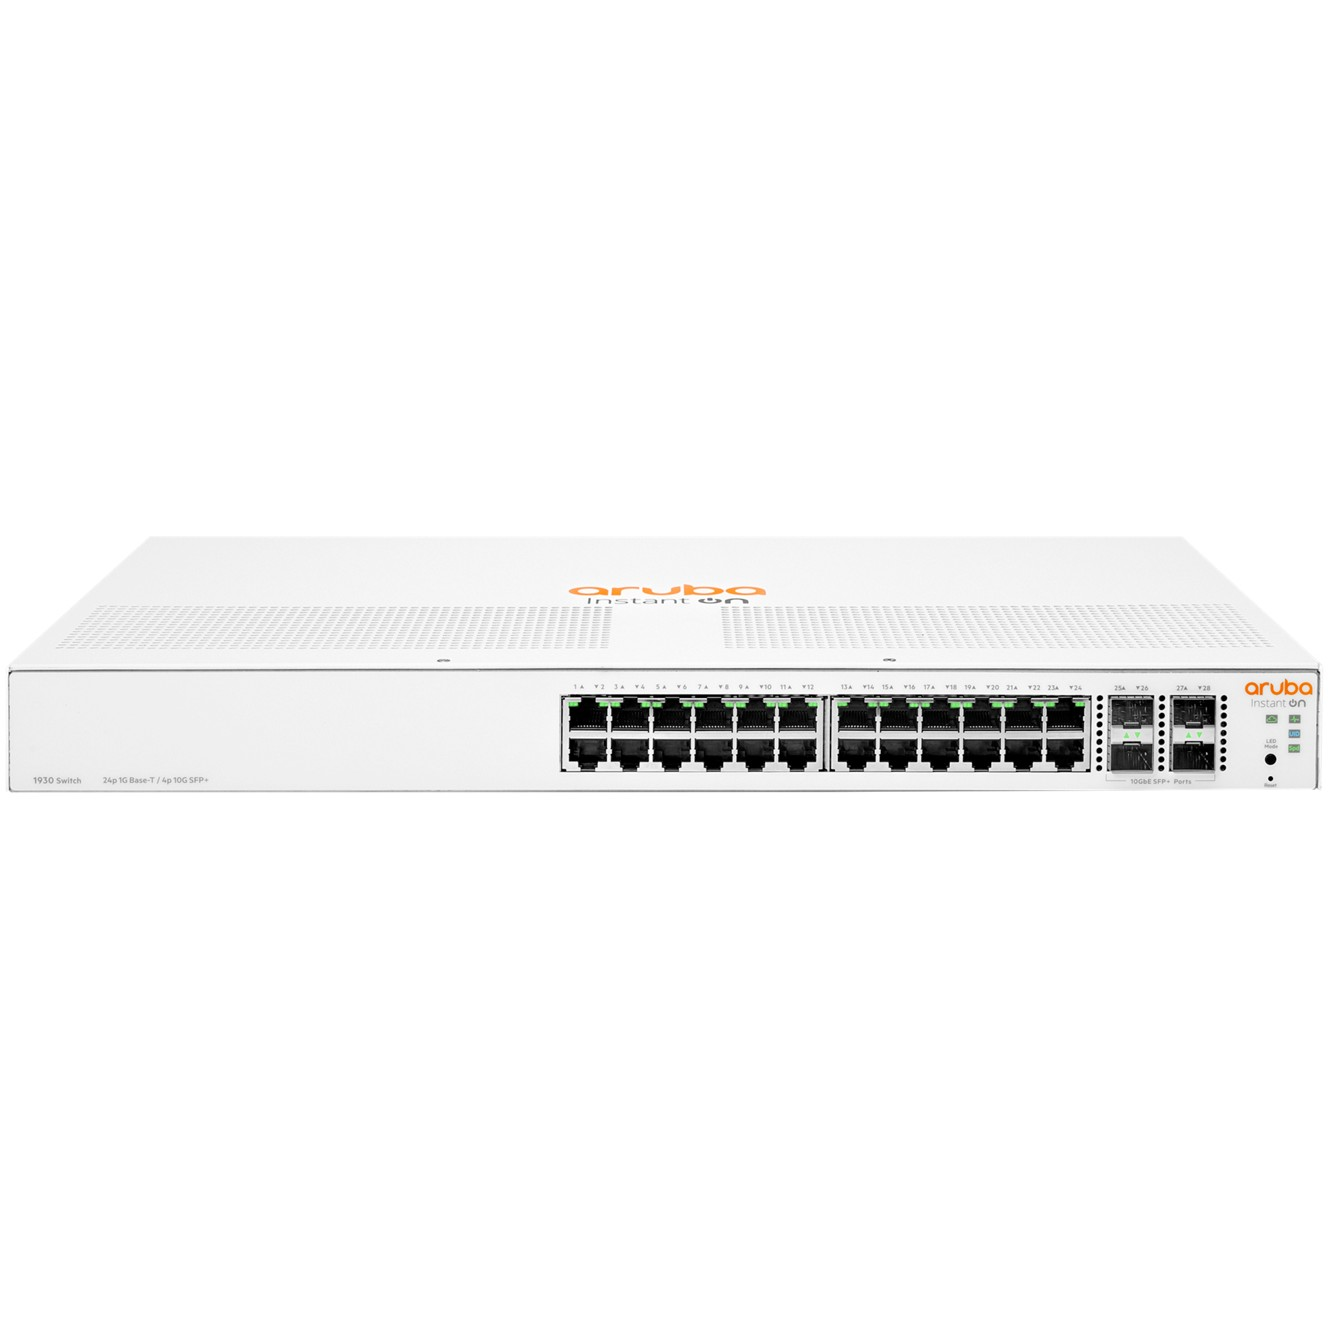 HPE HP Mbit/s Instant M Switches 1930 4SFP+ On Enterprise RM 1000 managed